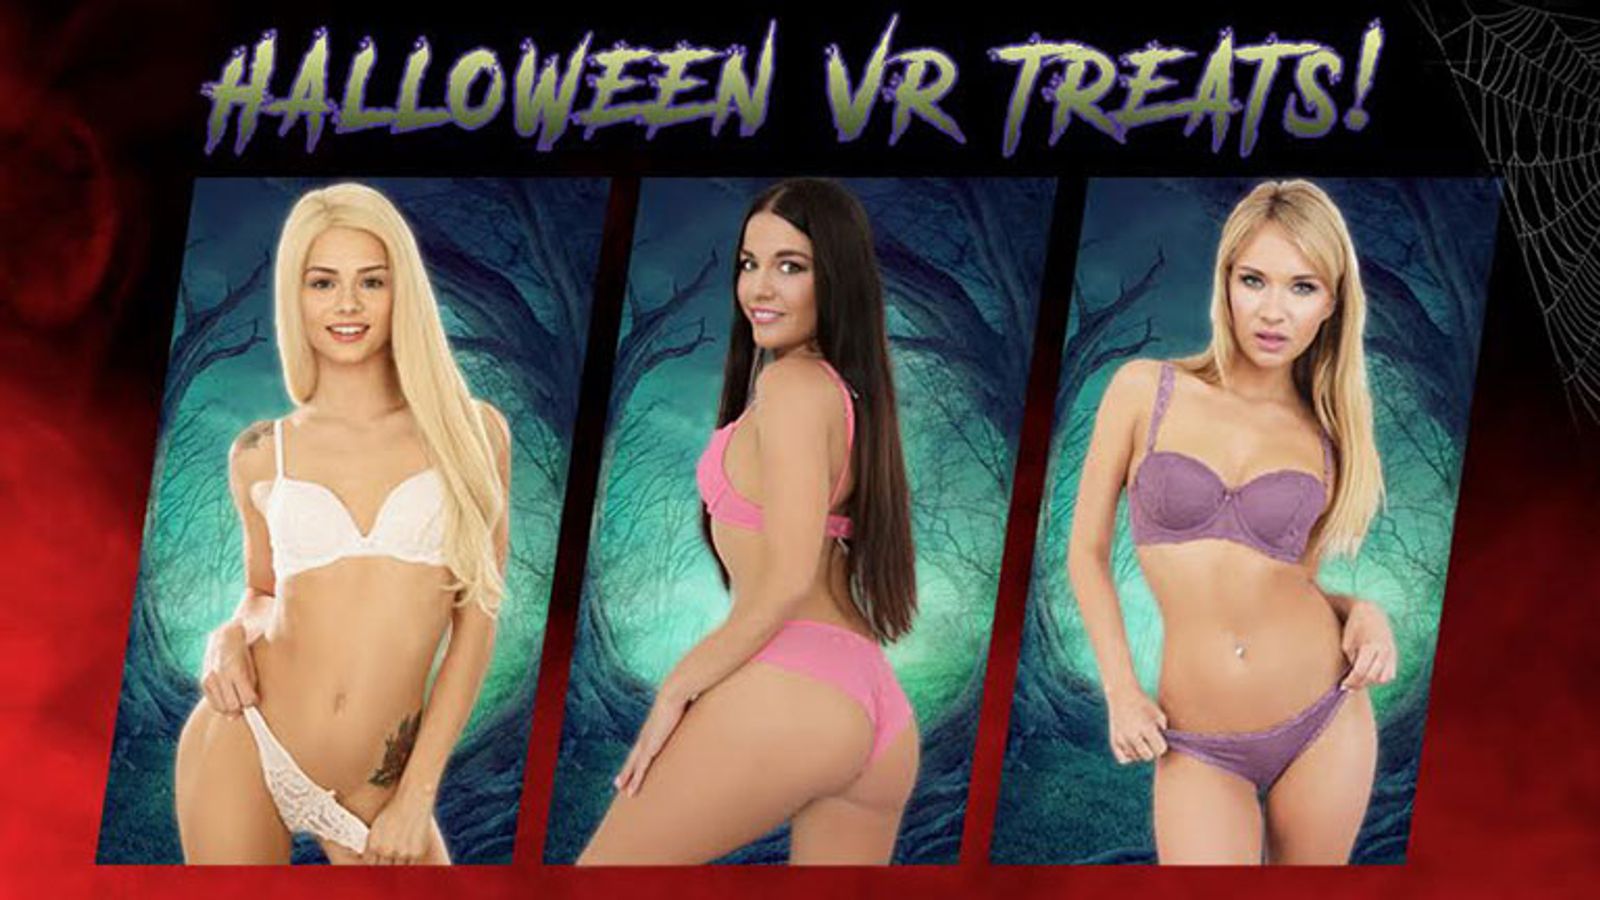 VRBangers.com Celebrates Halloween The VR Way With 5 New Releases